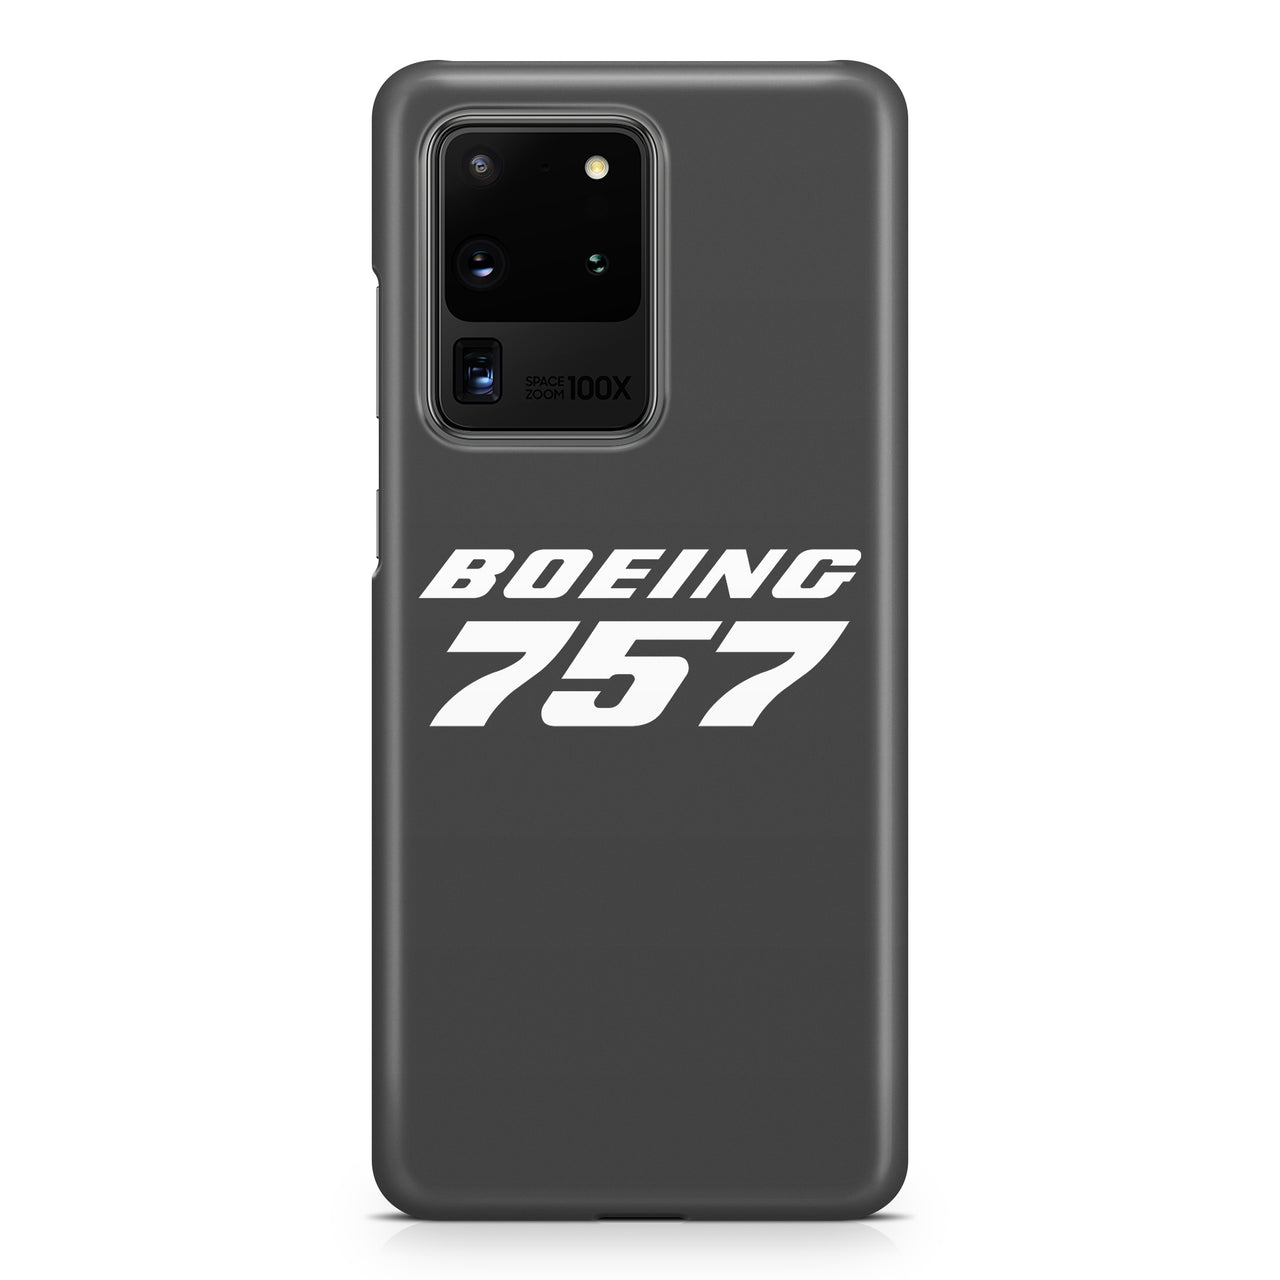 Boeing 757 & Text Samsung A Cases